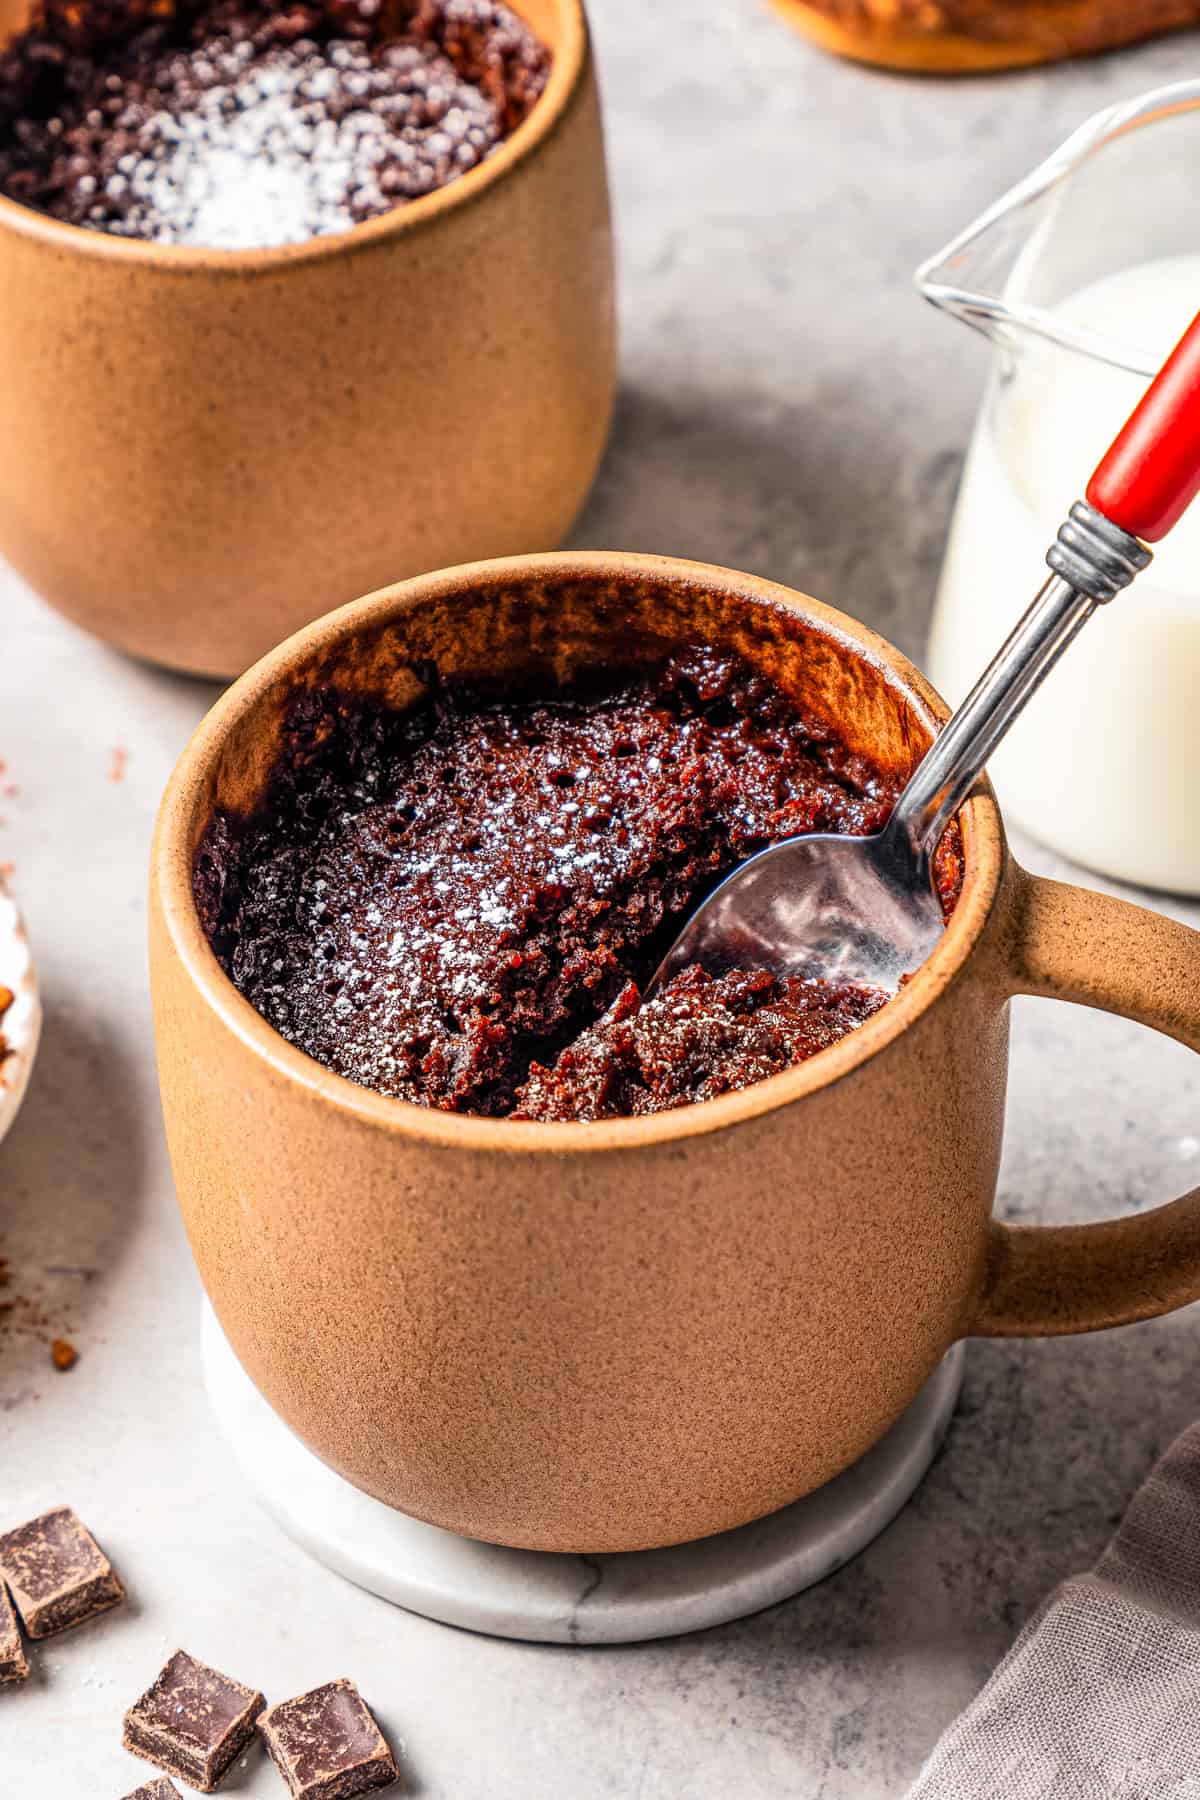 A spoon in a chocolate mug cake, with a second mug cake in the background.